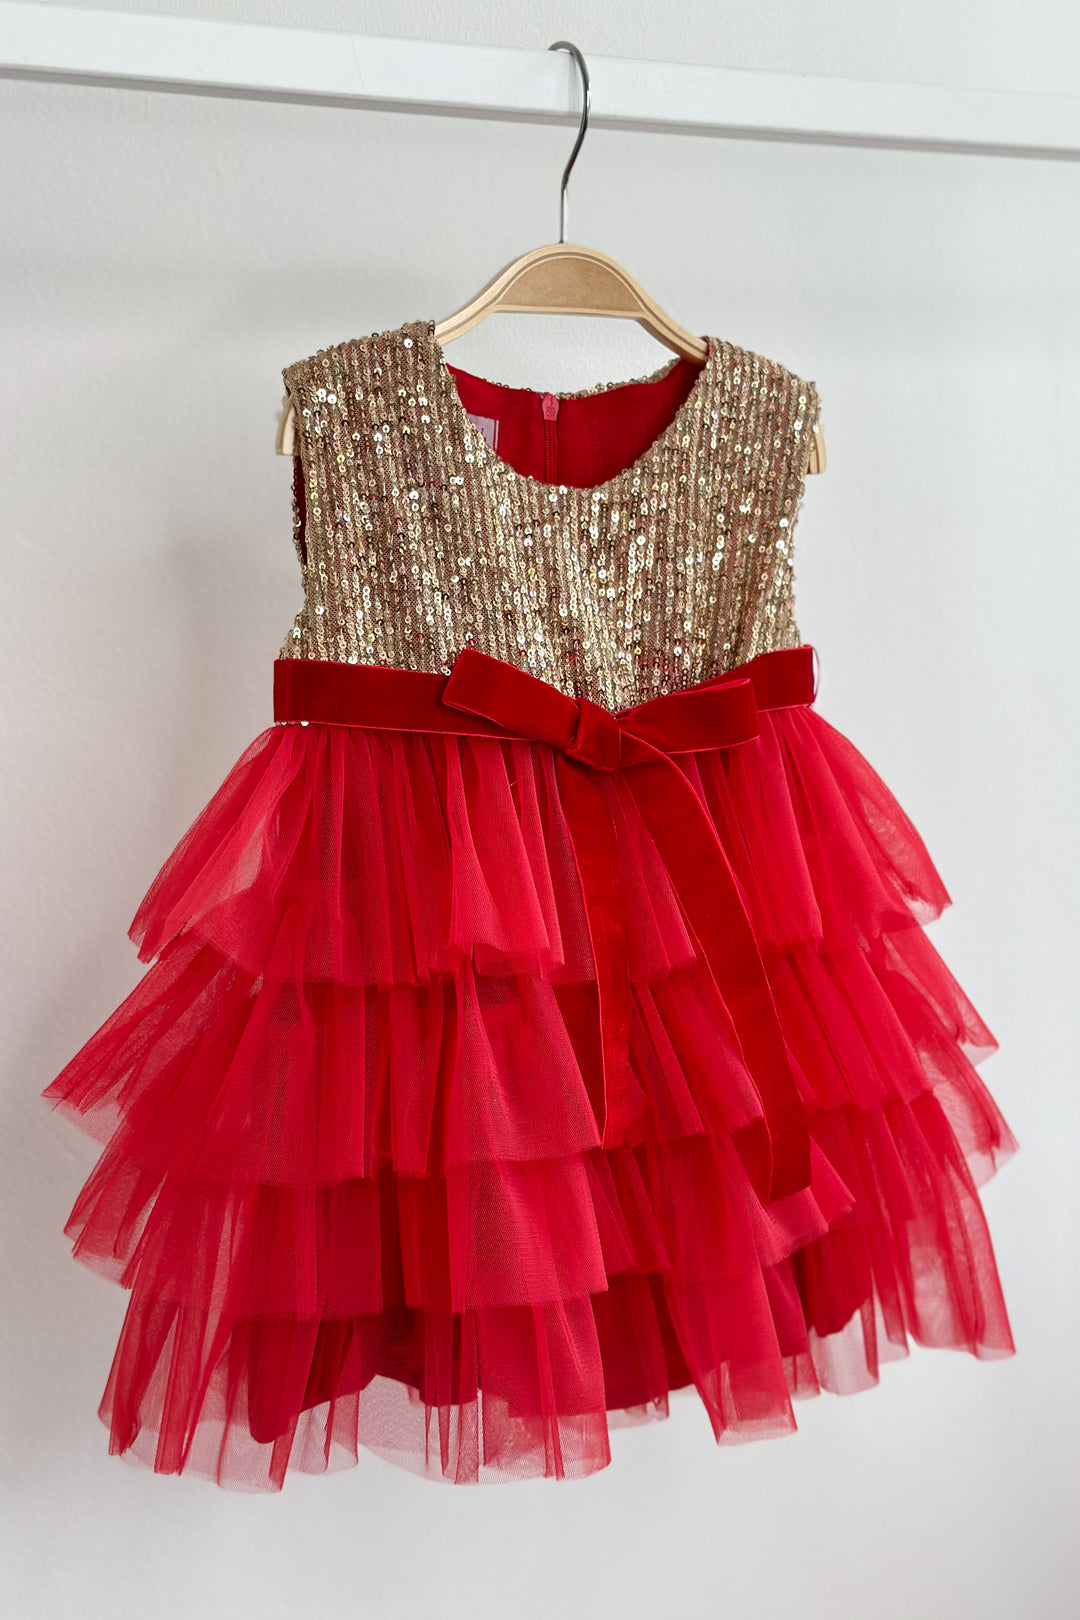 Phi "Eve" Gold Sequin Red Tulle Dress | Millie and John